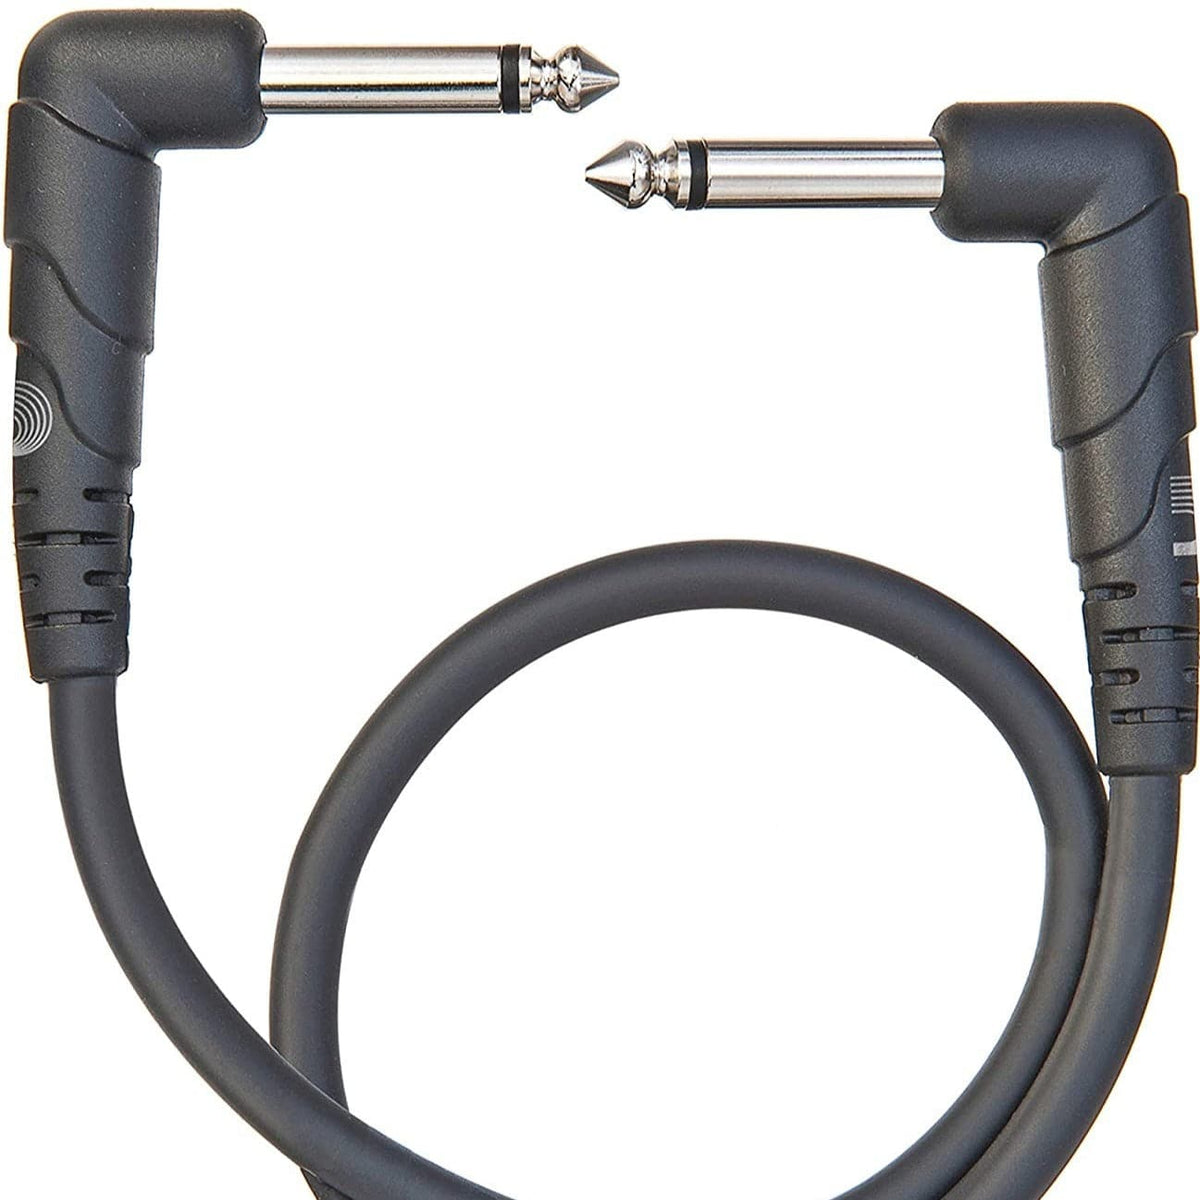 D'Addario Classic Patch Cable - 1 foot (30cm) Right Angle